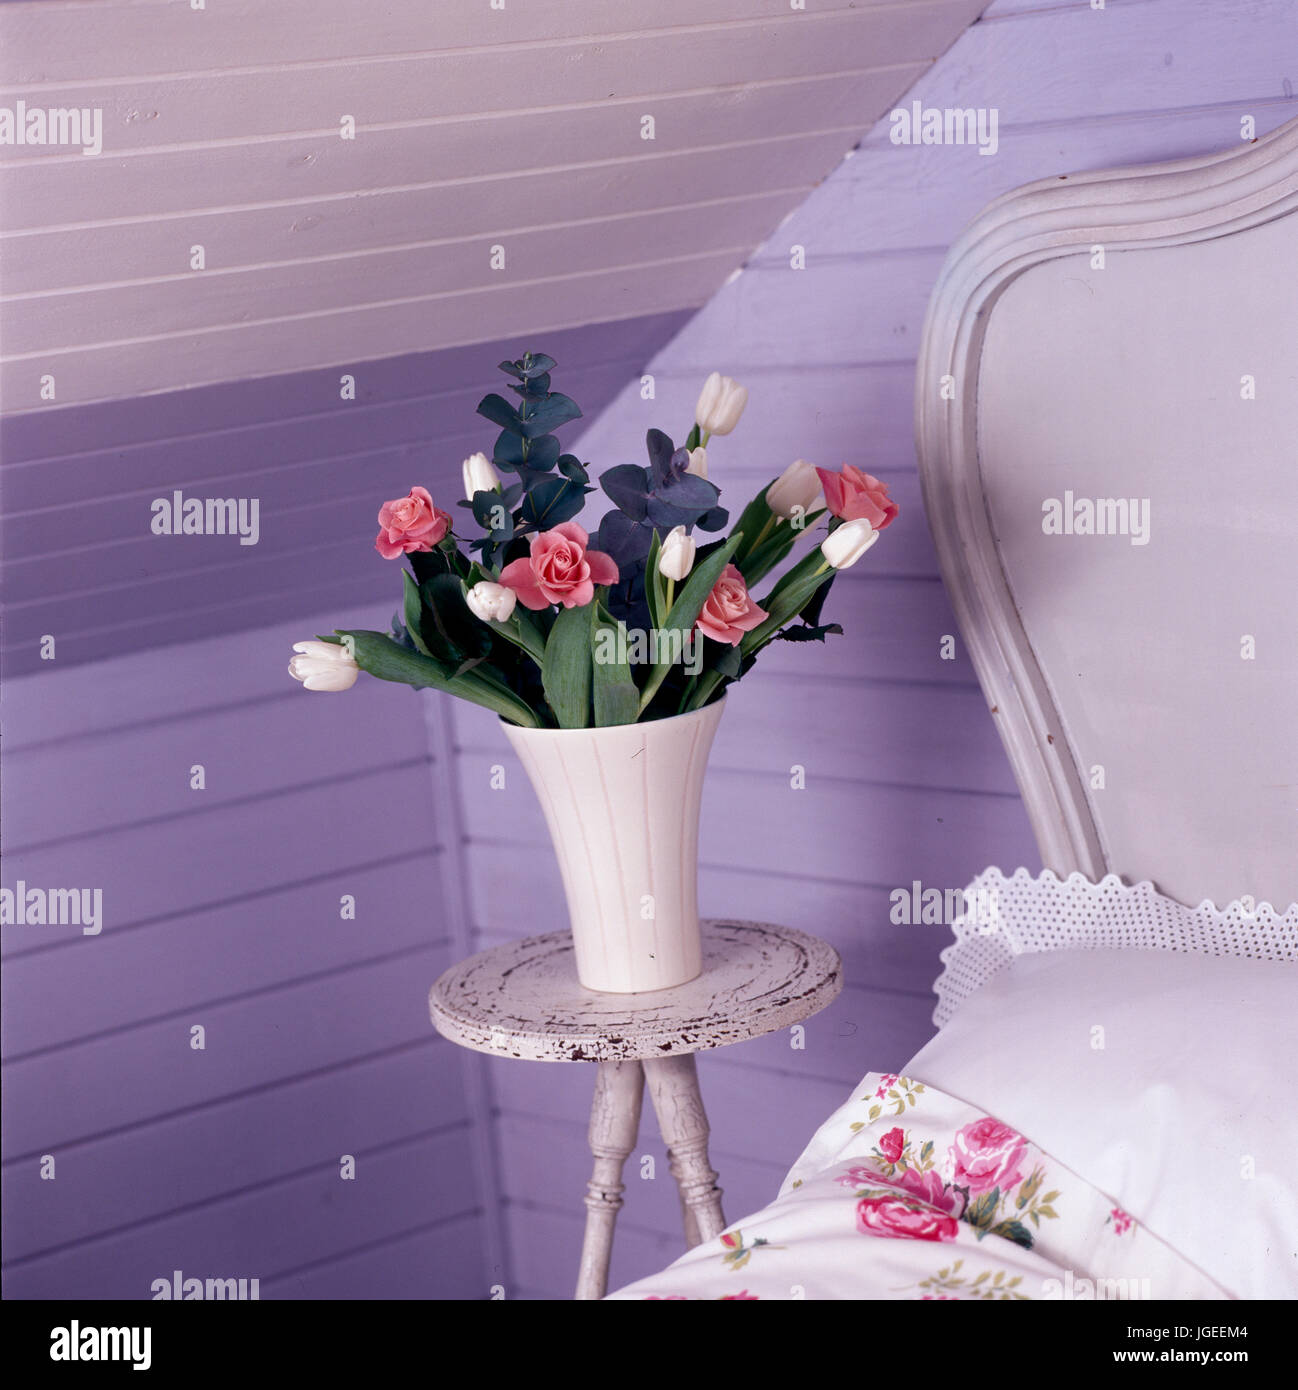 Closeup of flowers in corner of mauve bedroom ith tongue+groove panelled walls Stock Photo